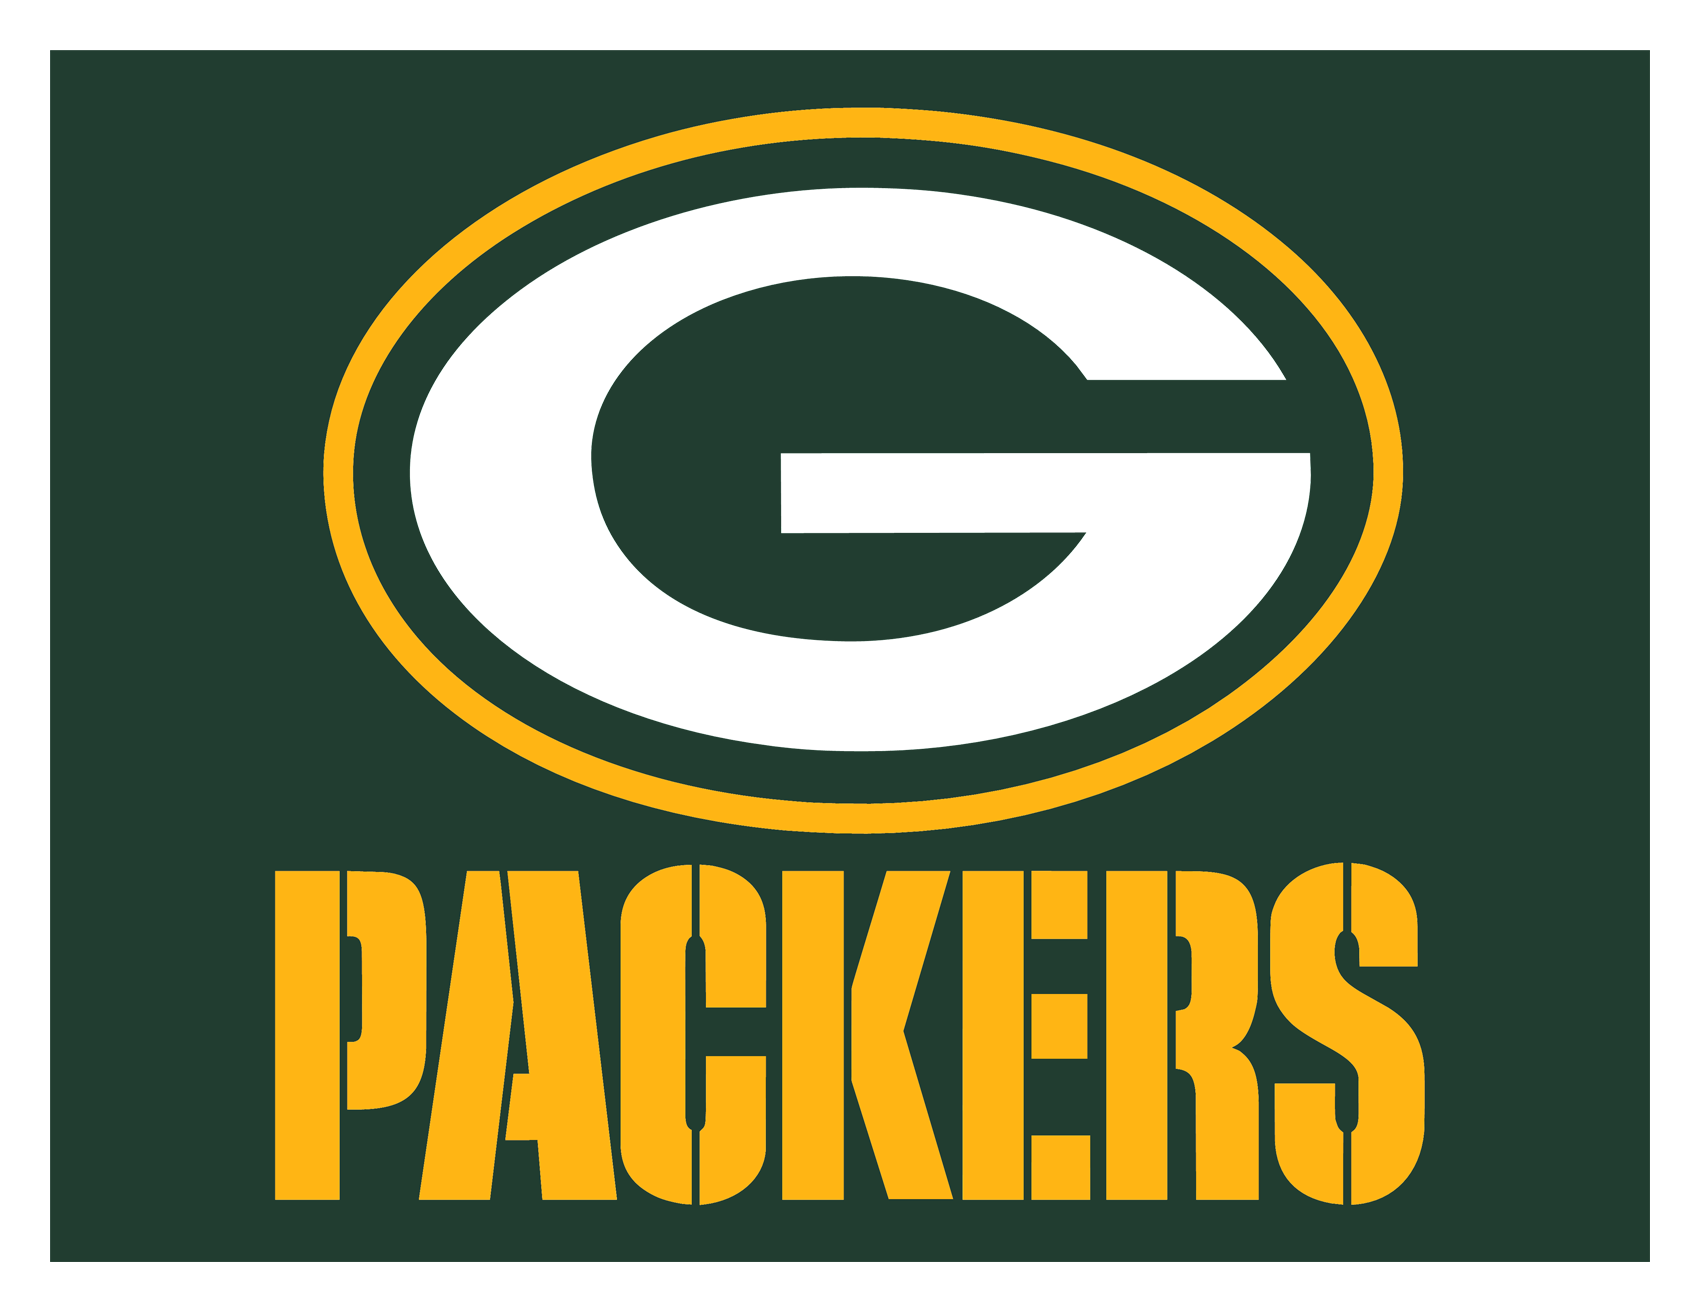 Green Bay Packers Logo, Green Bay Packers Symbol Meaning, History and